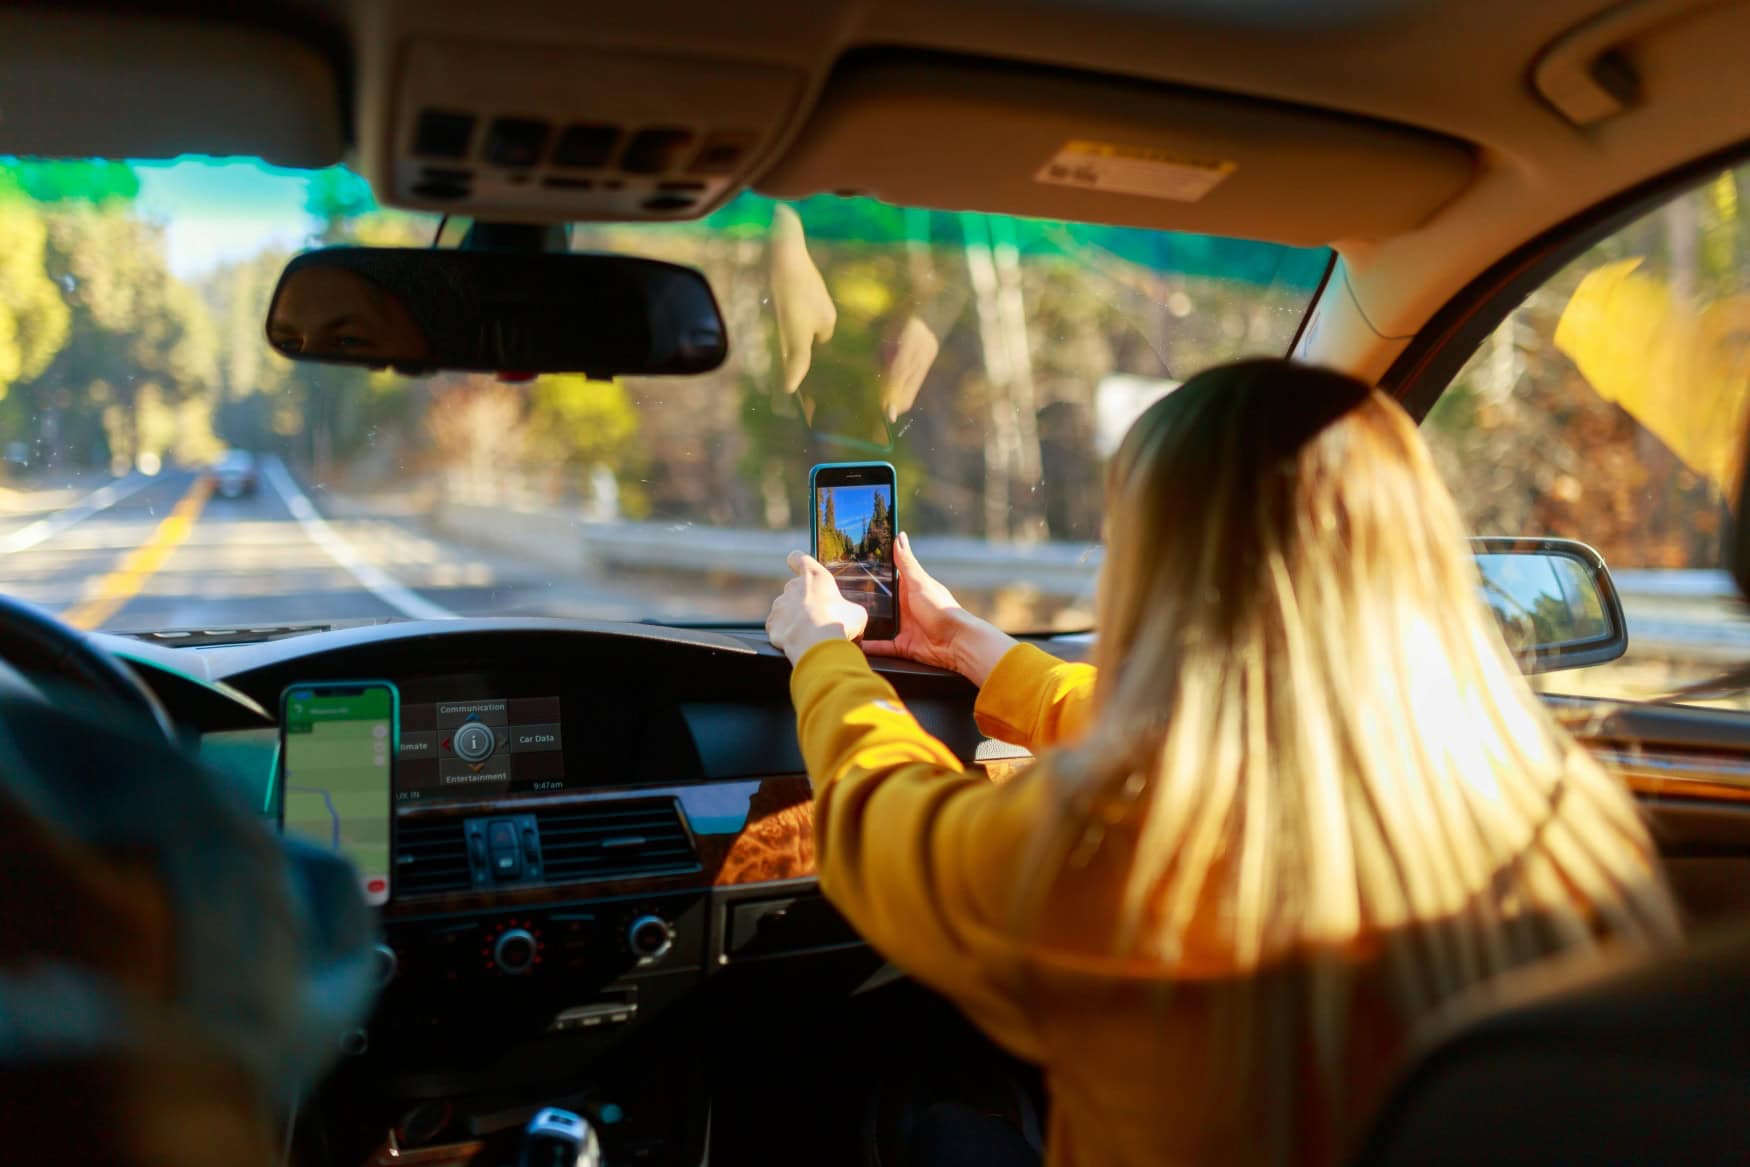 A passenger in the car holds a smartphone up to the windshield and takes a photo